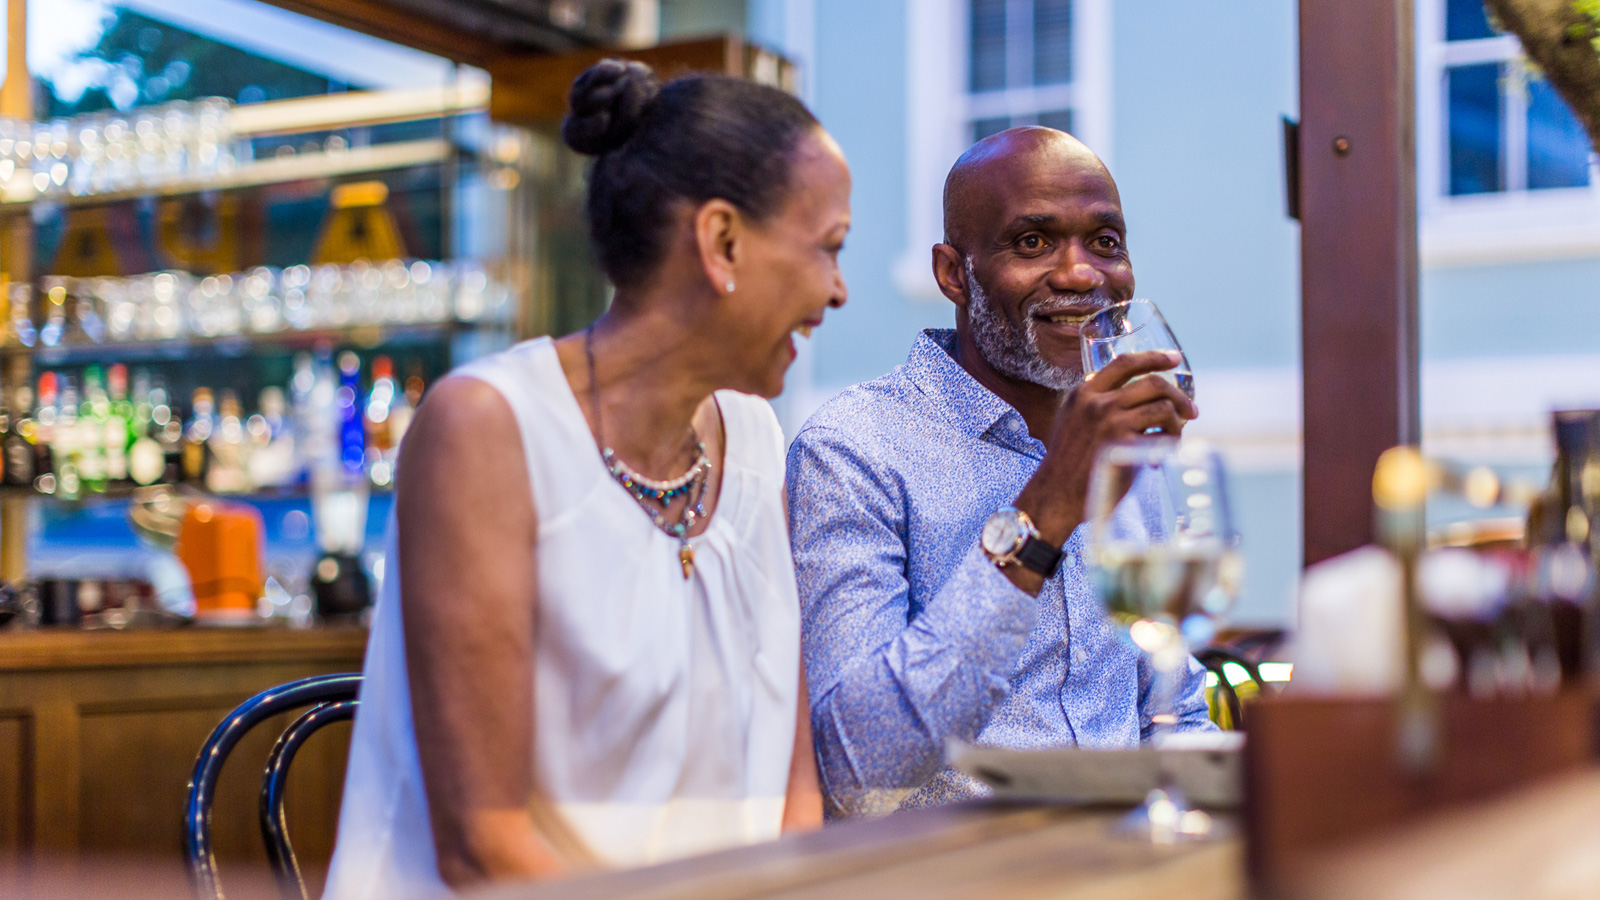 Black woman in white, man in blue shirt drinking white wine at bar